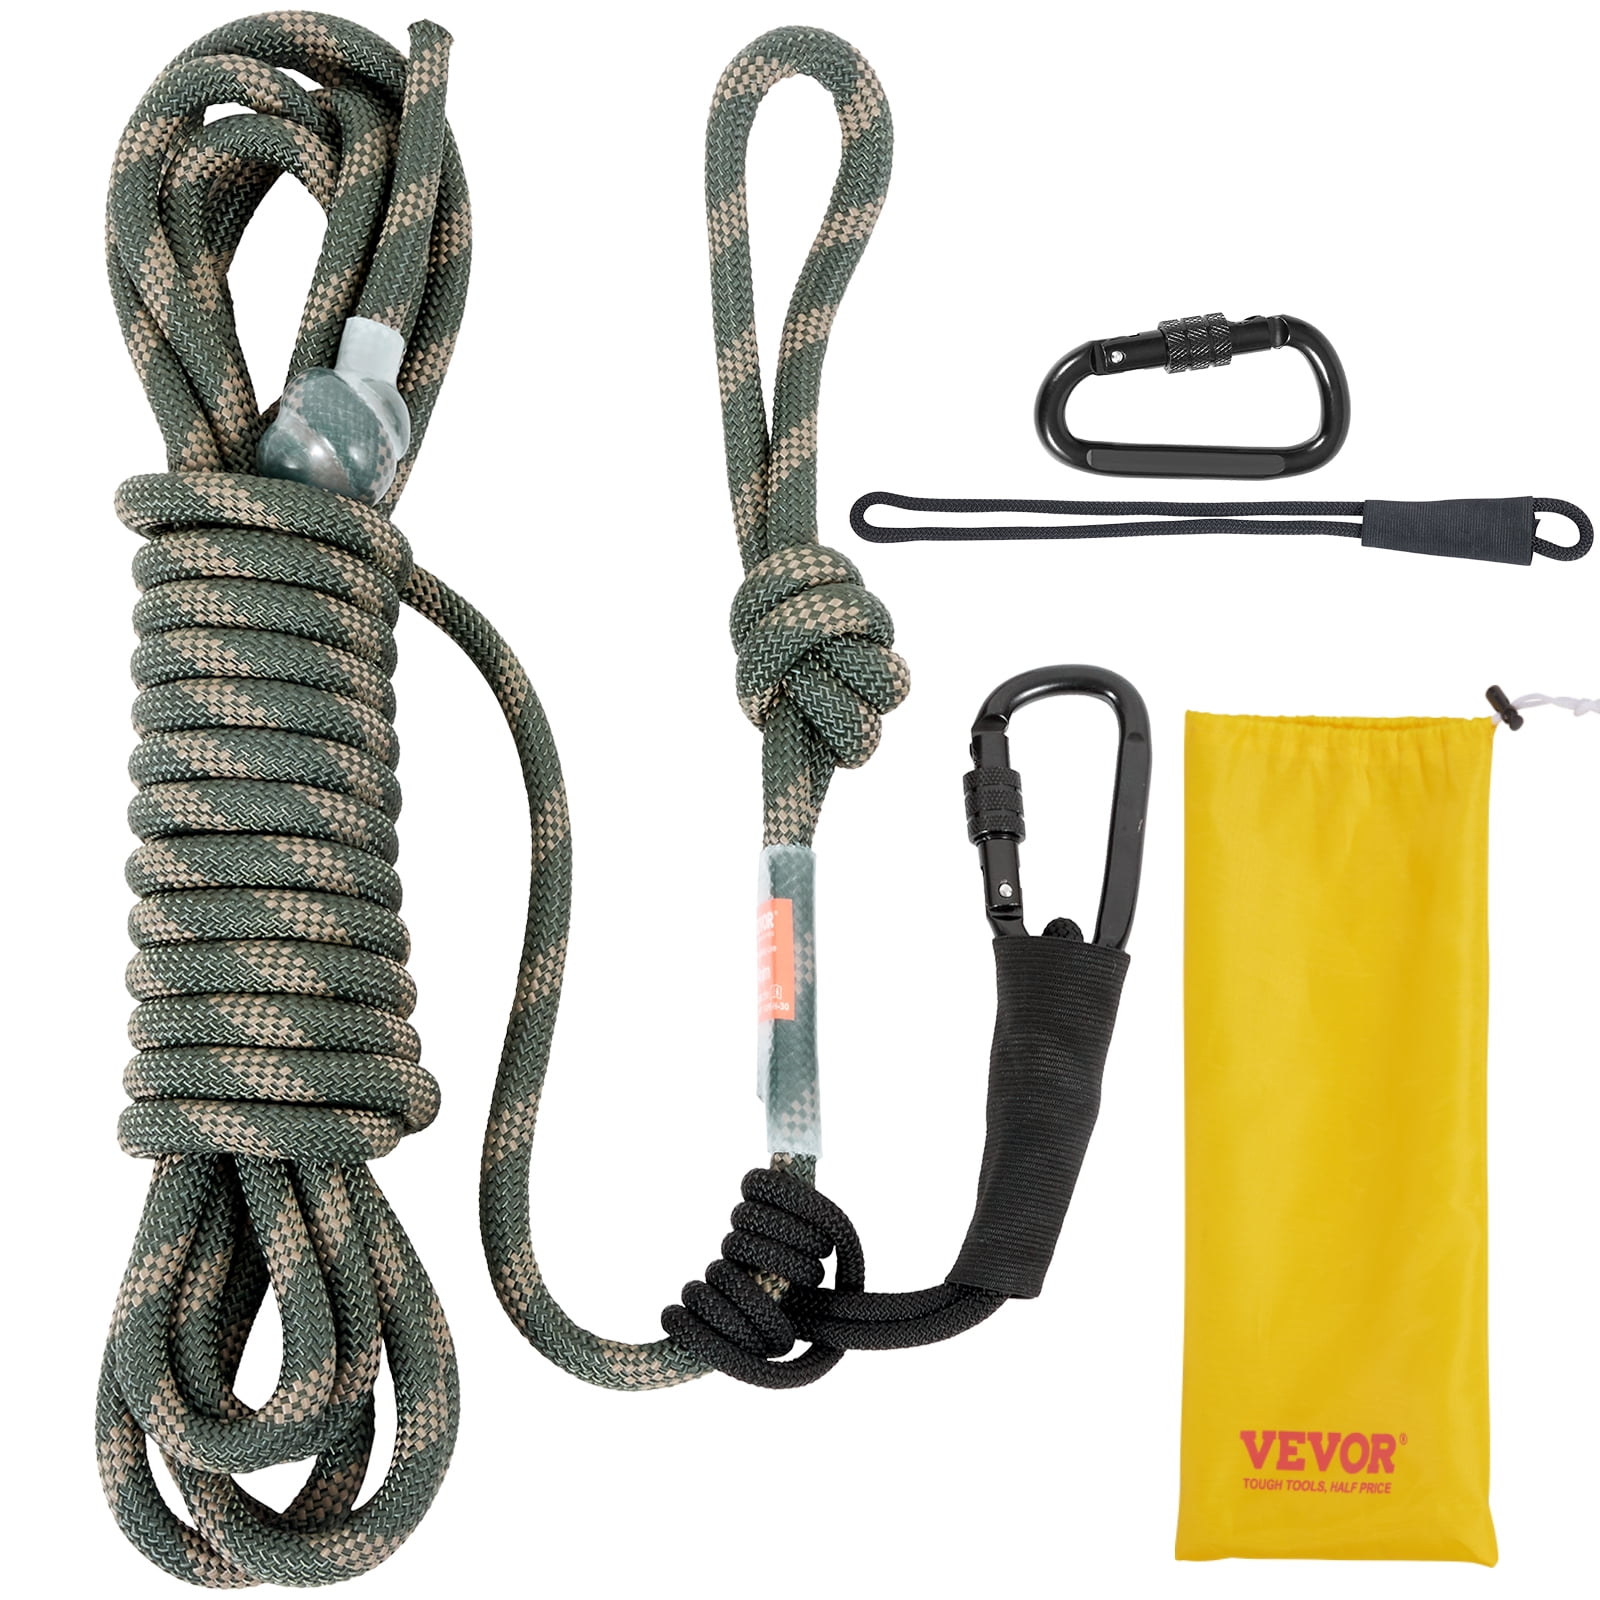 BENTISM Tree Stand Safety Rope, 30 ft/91.44 m Treestand Lifeline Rope 30KN  Breaking Tension, 0.6'' Hunting Safety Line with Prusik Knot, 2pcs